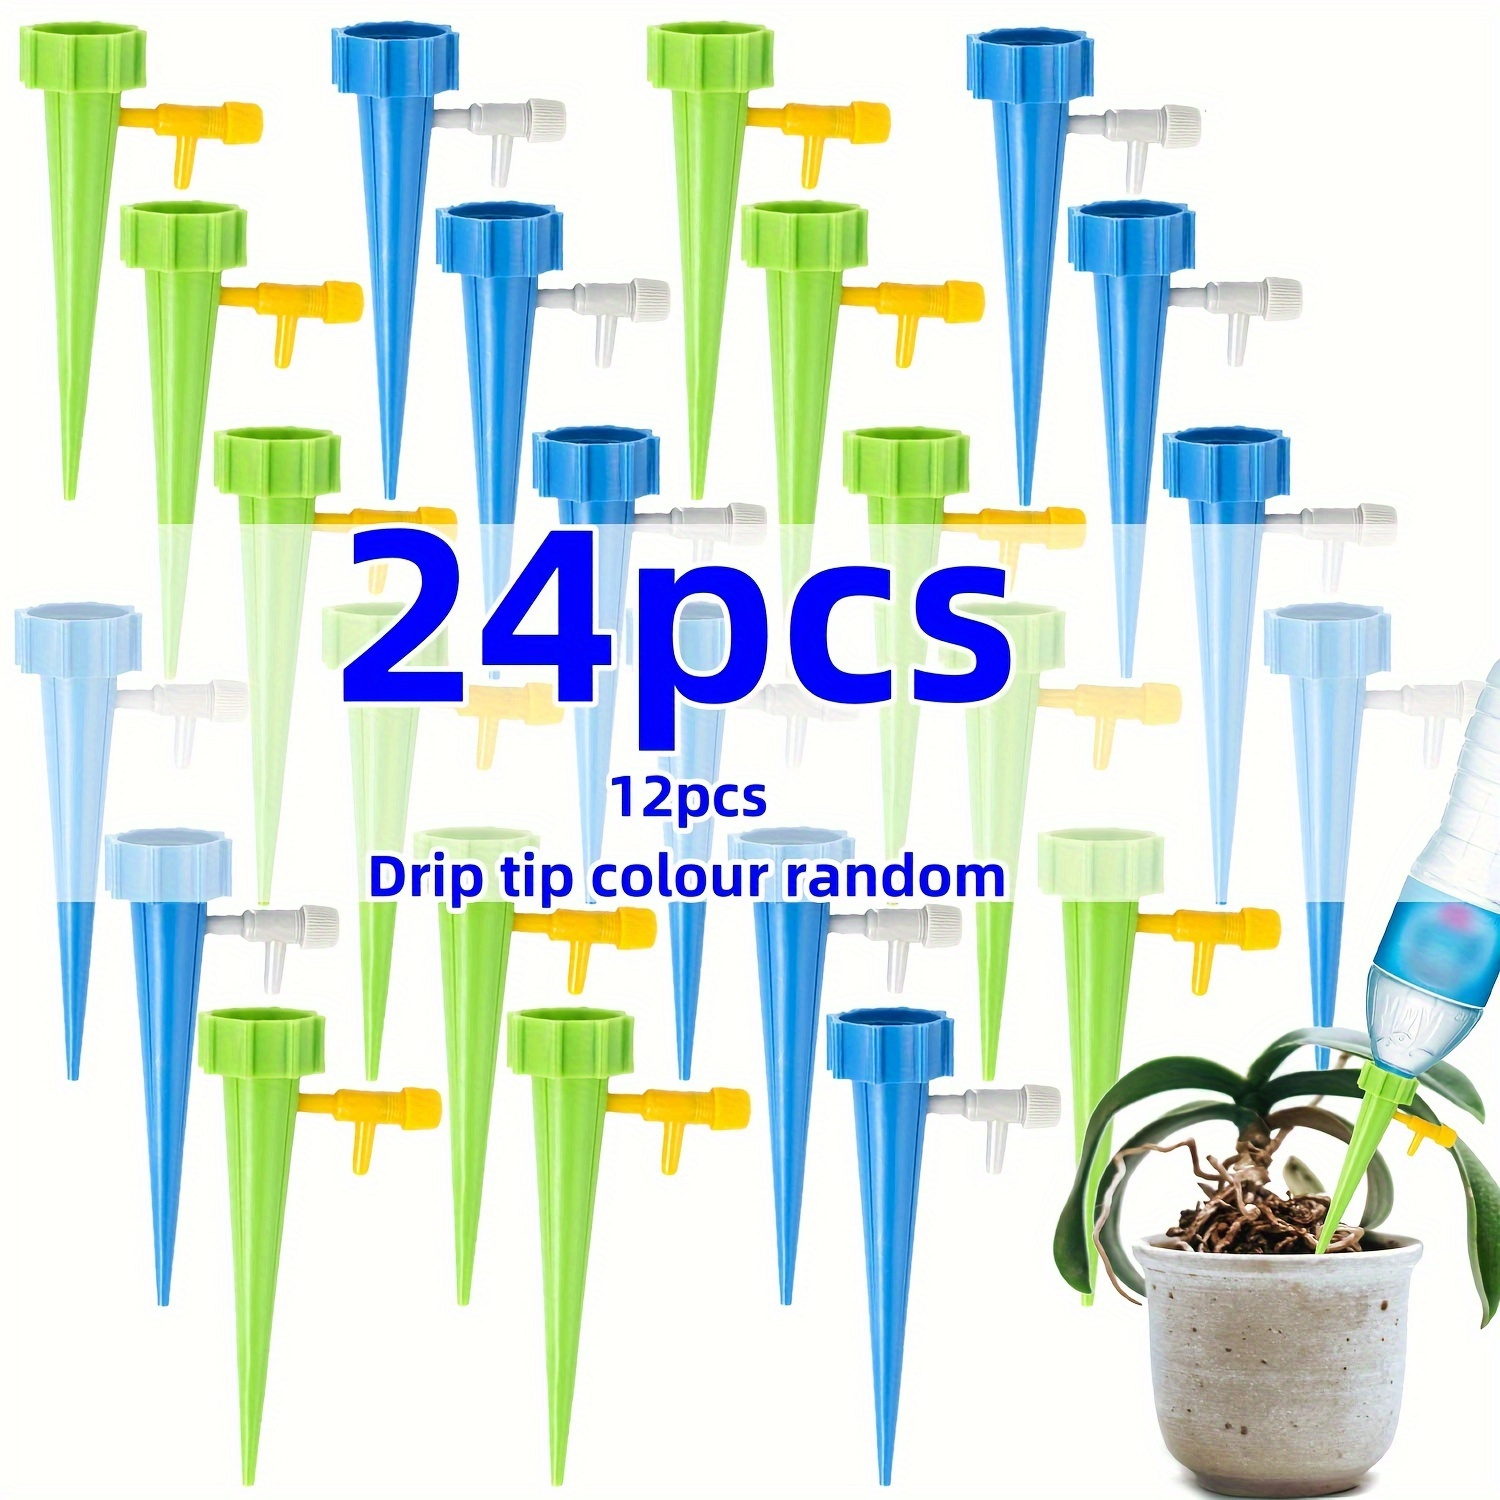 

Adjustable Self-watering Spikes - 24pc/12pc Set, Automatic Drip Irrigation System For Indoor & Outdoor Gardens, Universal Connector, No Batteries Required, Plastic - Assorted Drip Tip Colors